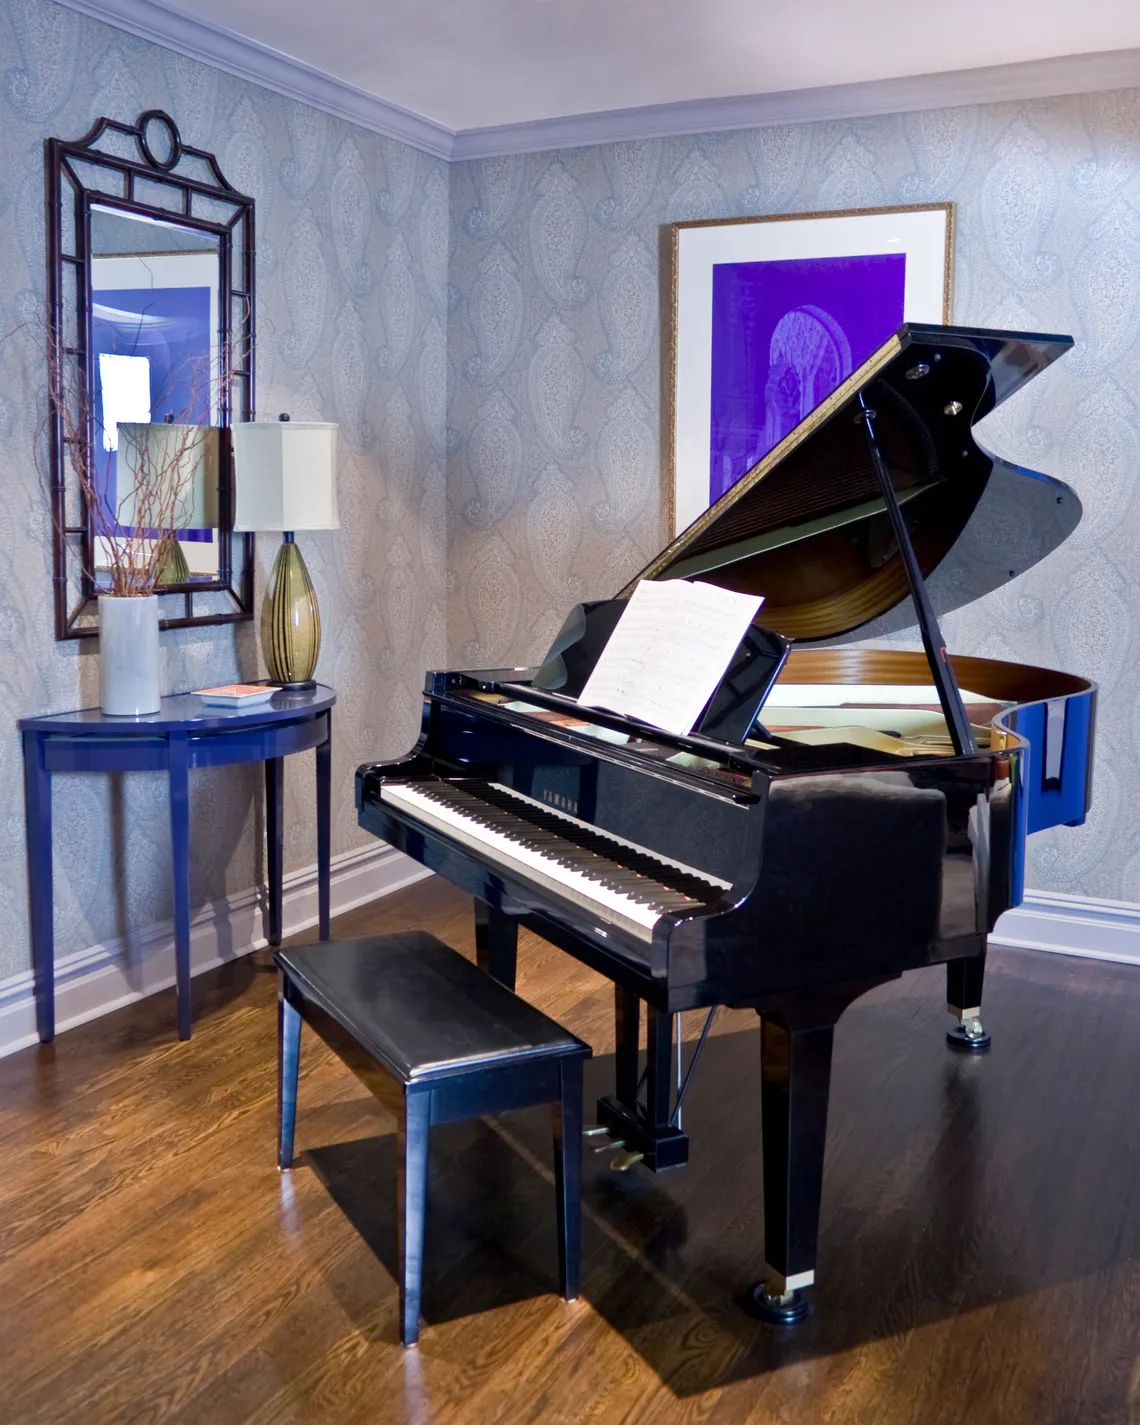 A Colorful Brooklyn Apartment, Designed Around a Baby Grand